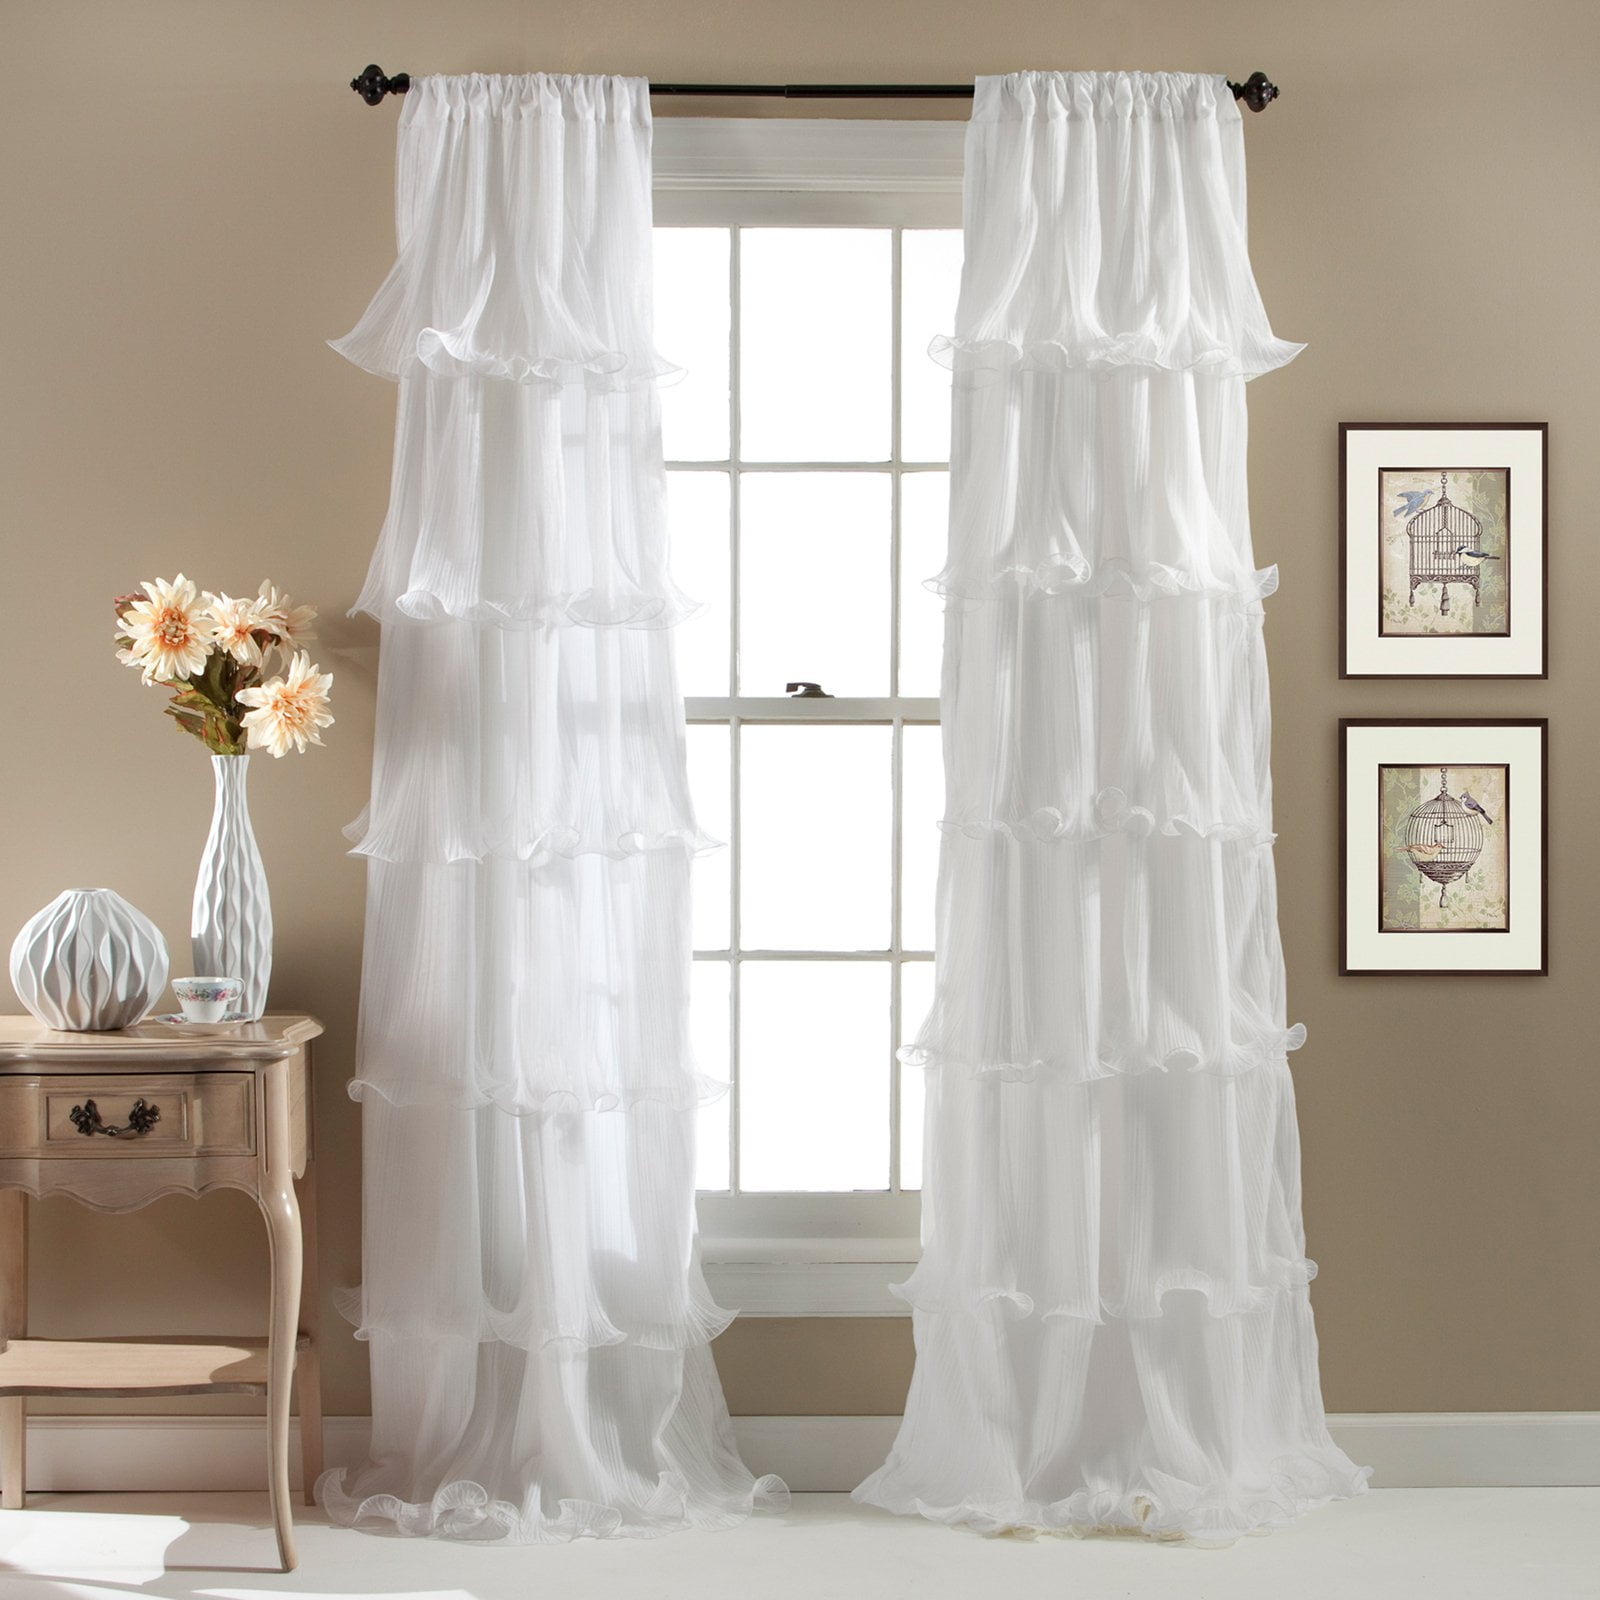 SOFT MULTILAYERS VOILE SHEER FABRIC WINDOW CURTAIN RUFFLE PANEL 1PC GYPSY WHITE 